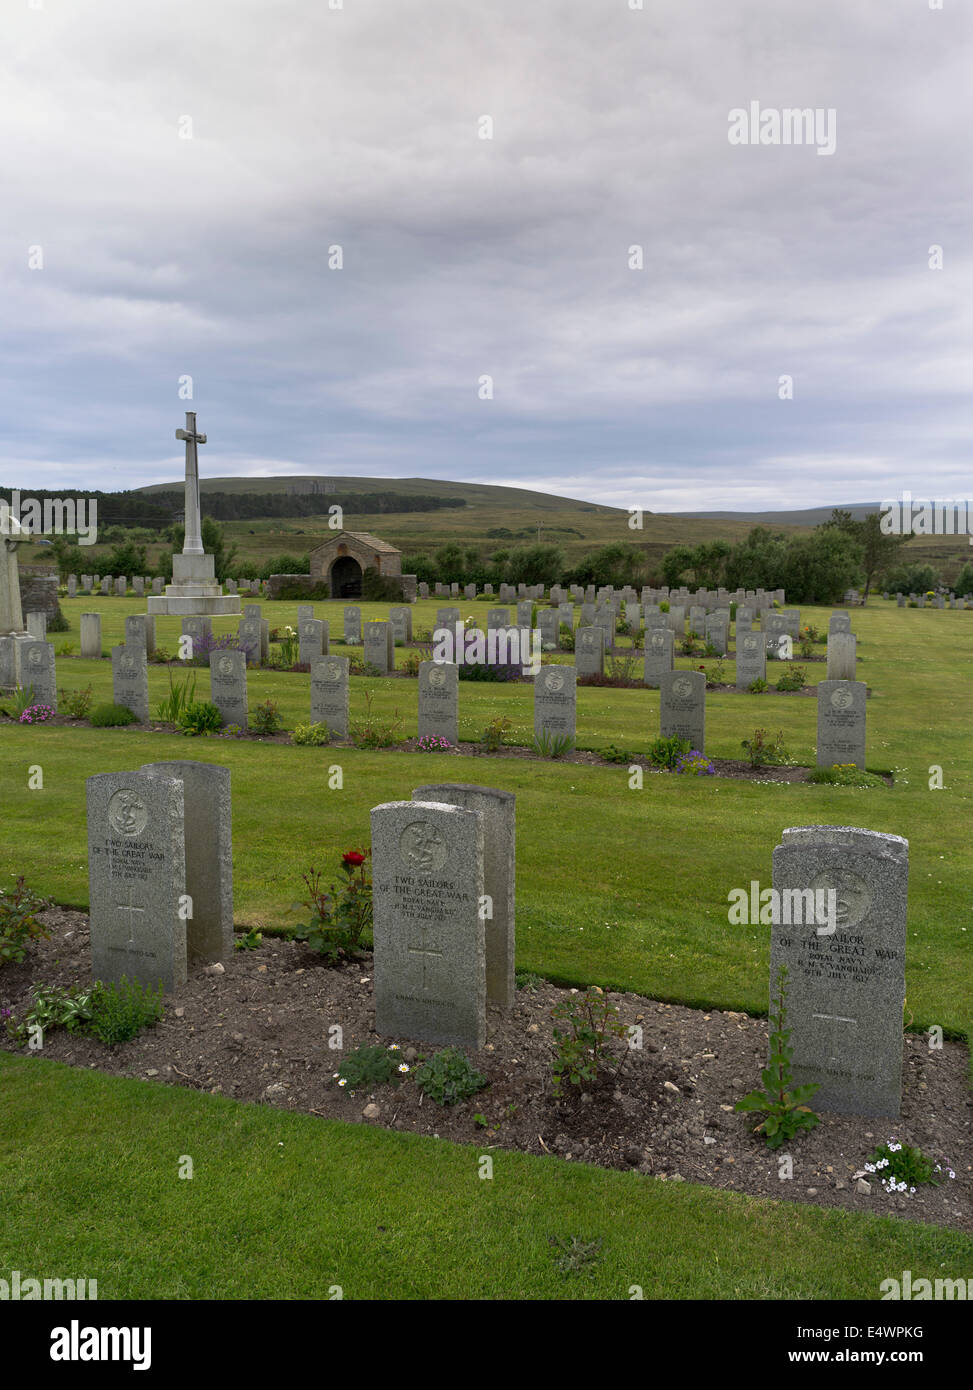 dh Lyness Naval Cemetery HOY ORKNEY Gravestones World war one graves navy military cemetery ww1 Stock Photo